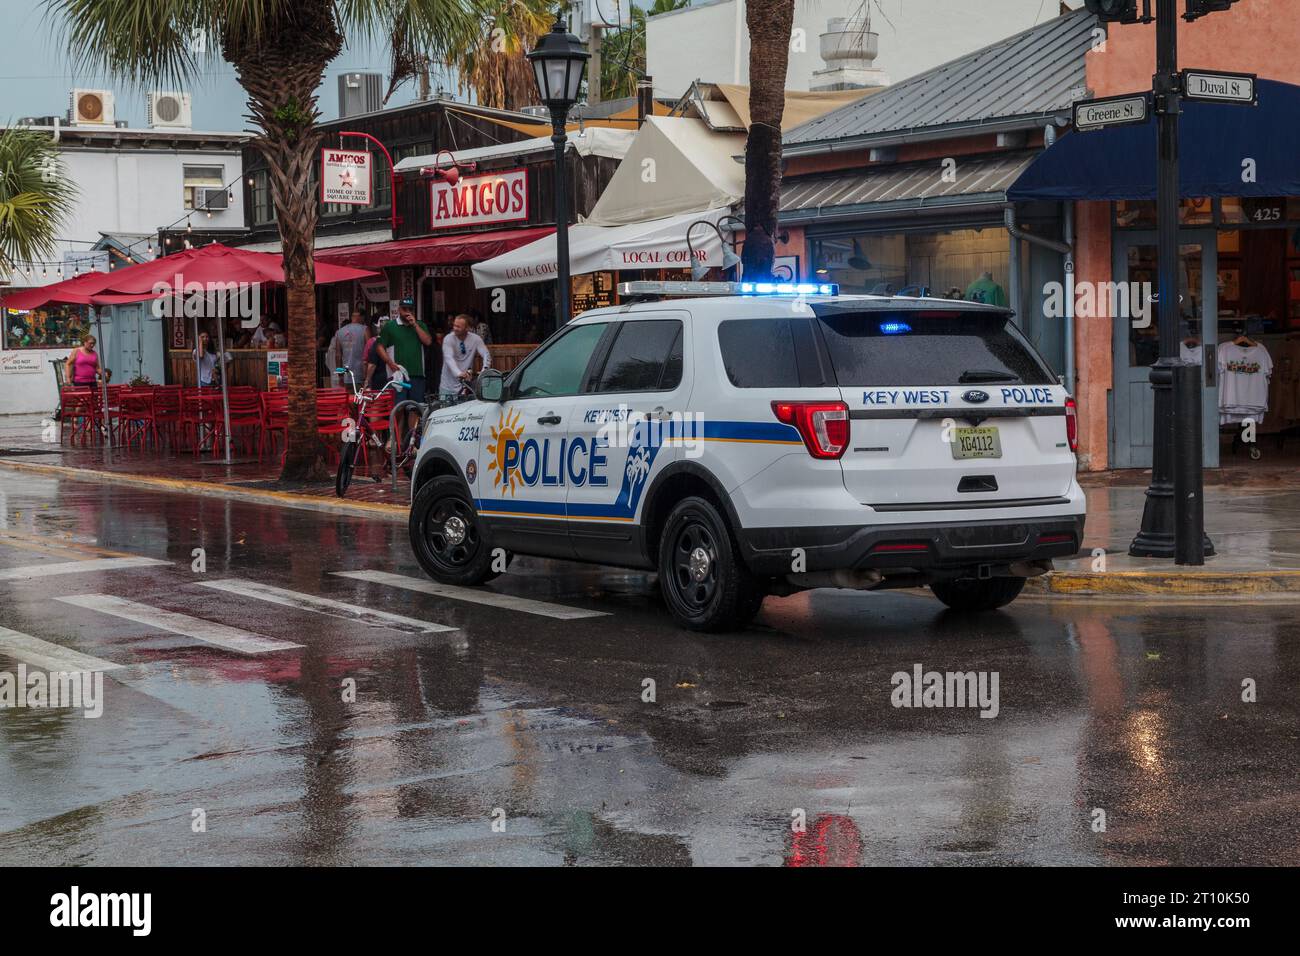 The Key West Police Cruiser. Duval Street, Florida, USA, on a wet and stormy day, responding to an emergency call Stock Photo